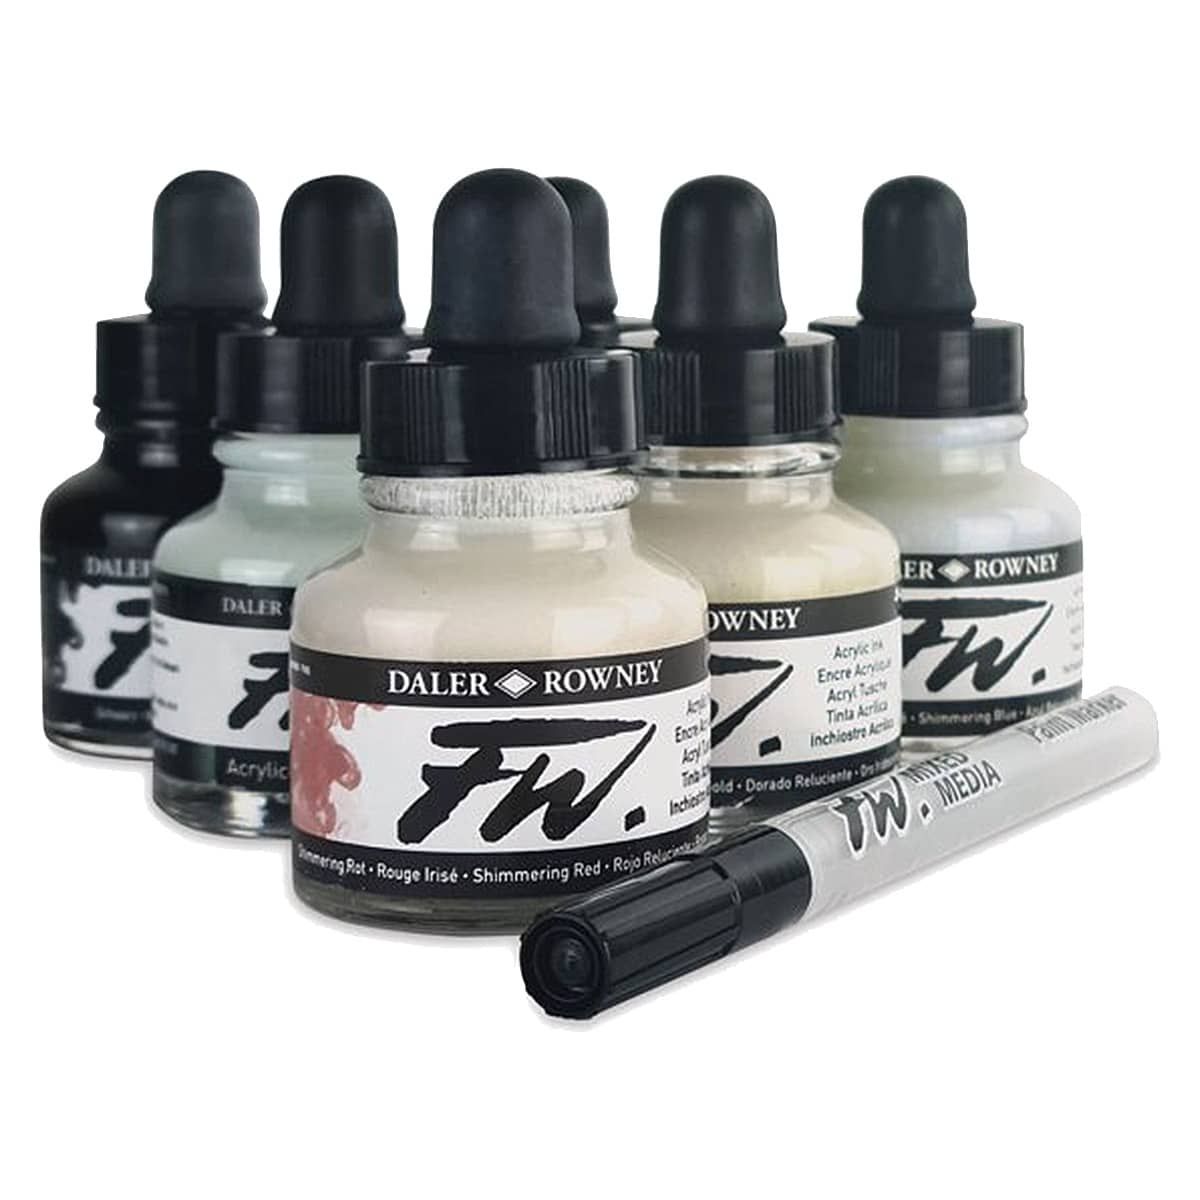 FW Acrylic Inks & Sets by Daler-Rowney